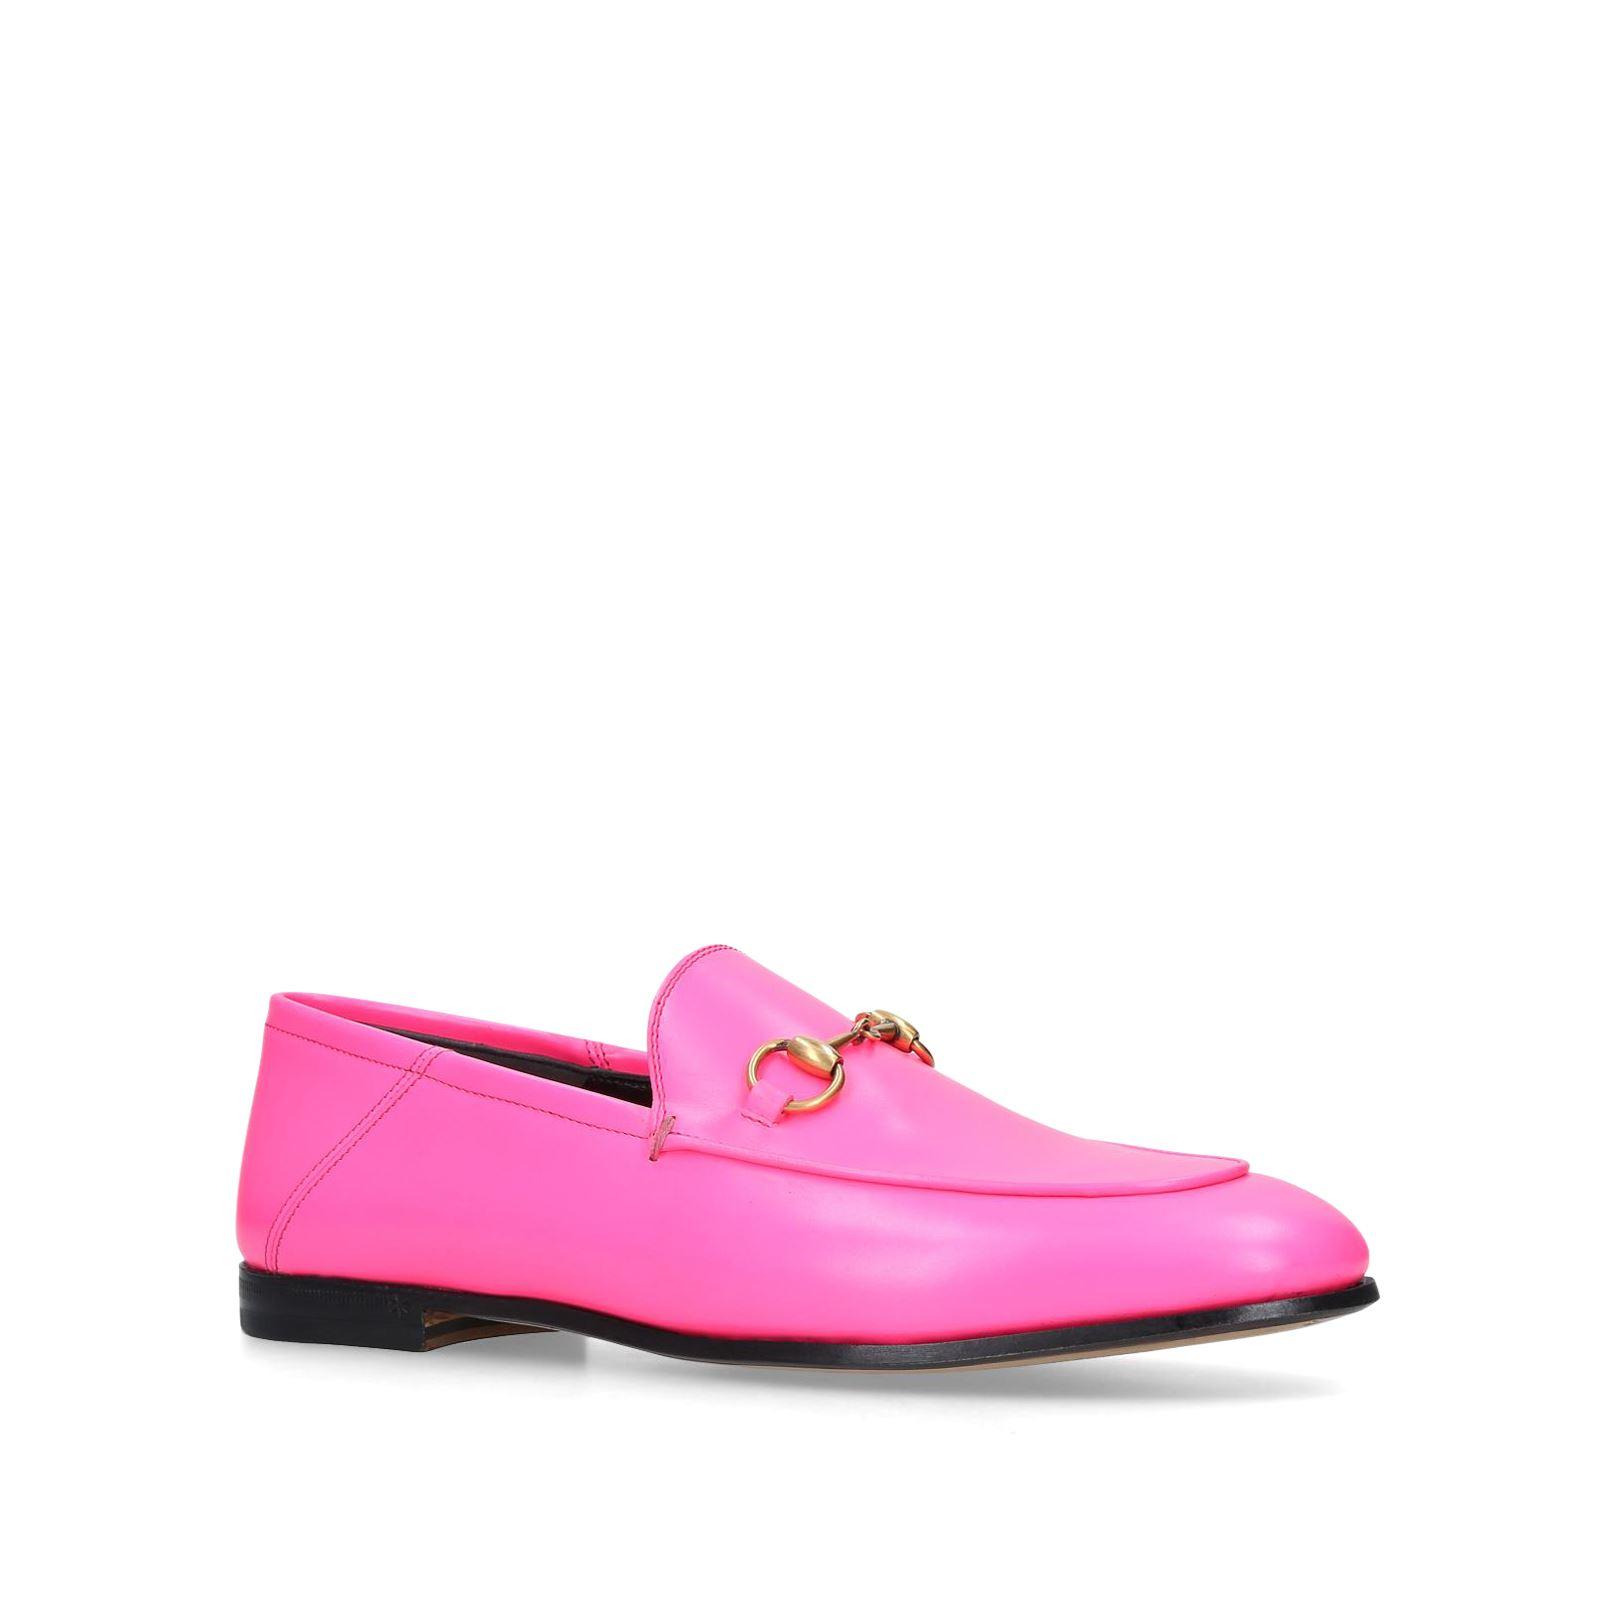 Gucci Leather Brixton Loafers in Pink - Lyst